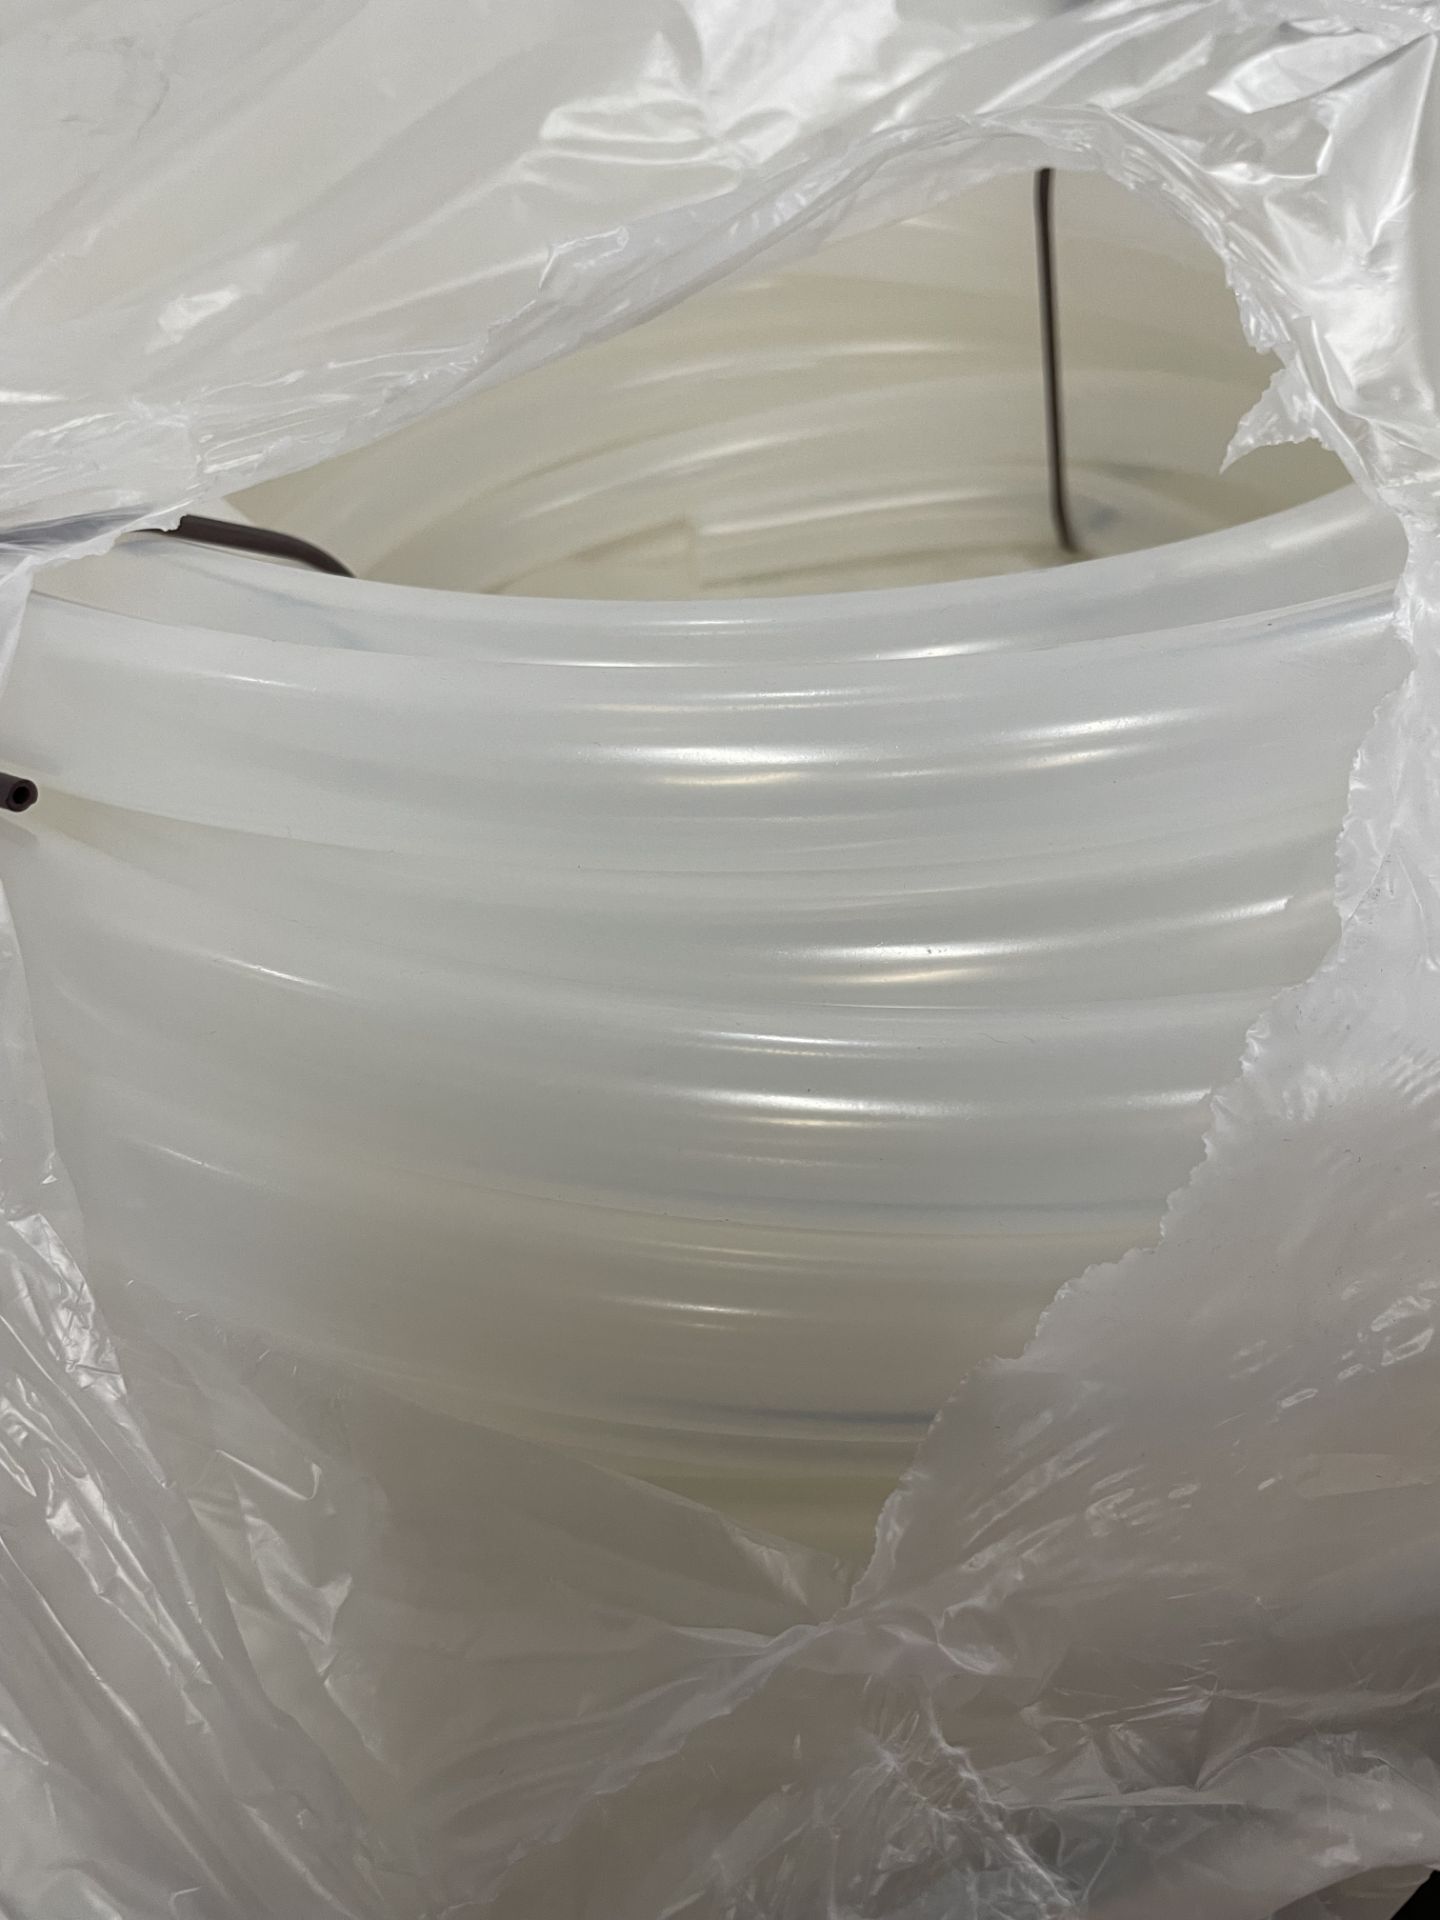 6 x Rolls Platinum Cured Stock Tube | 25m per roll - Image 2 of 2